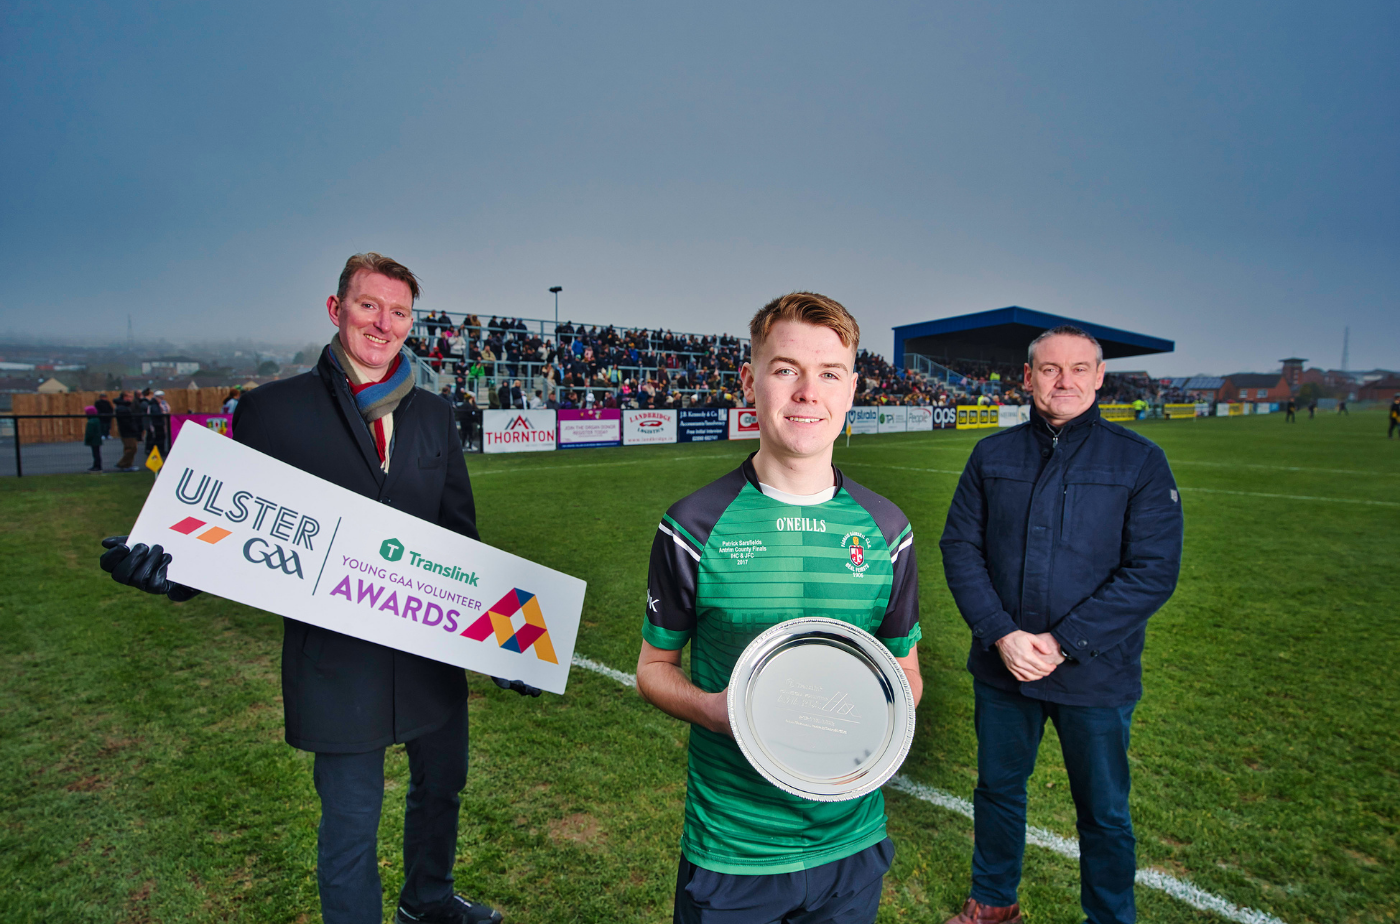 Oisin Coleman, 17, from Patrick Sarsfield GAC, Belfast, is presented with the Translink Ulster GAA Young Volunteer of the Year Award, by Translink’s Belfast Area Manager Damian Bannon, and Ulster GAA Vice President Ciaran McLaughlin